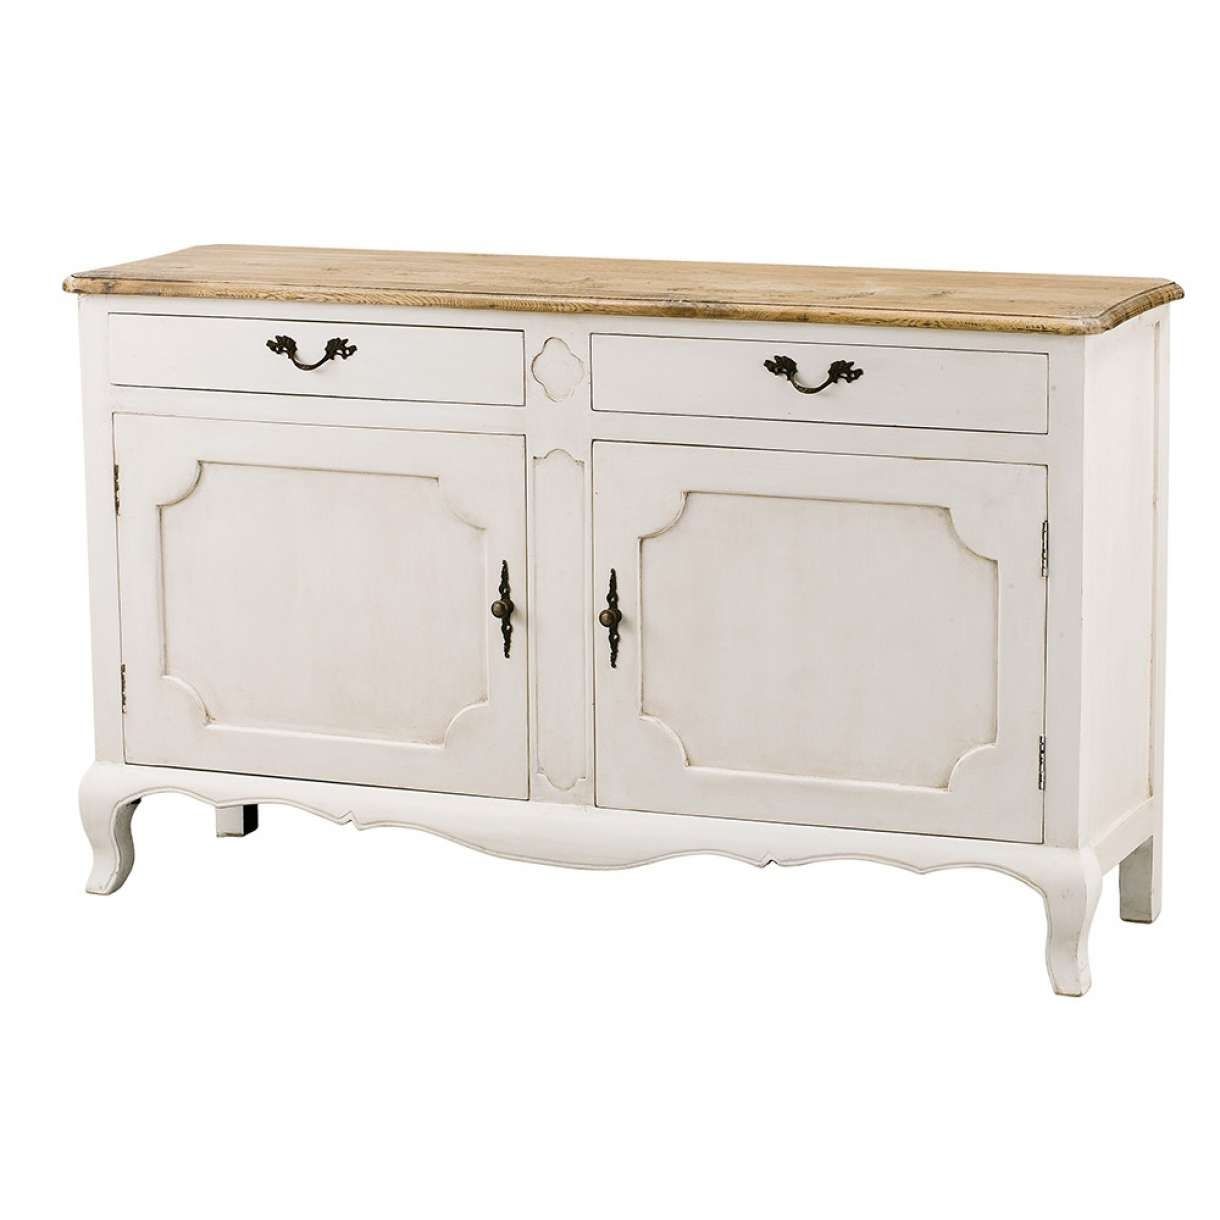 Oak Sideboard Distressed White Pertaining To Distressed Sideboards (View 8 of 20)